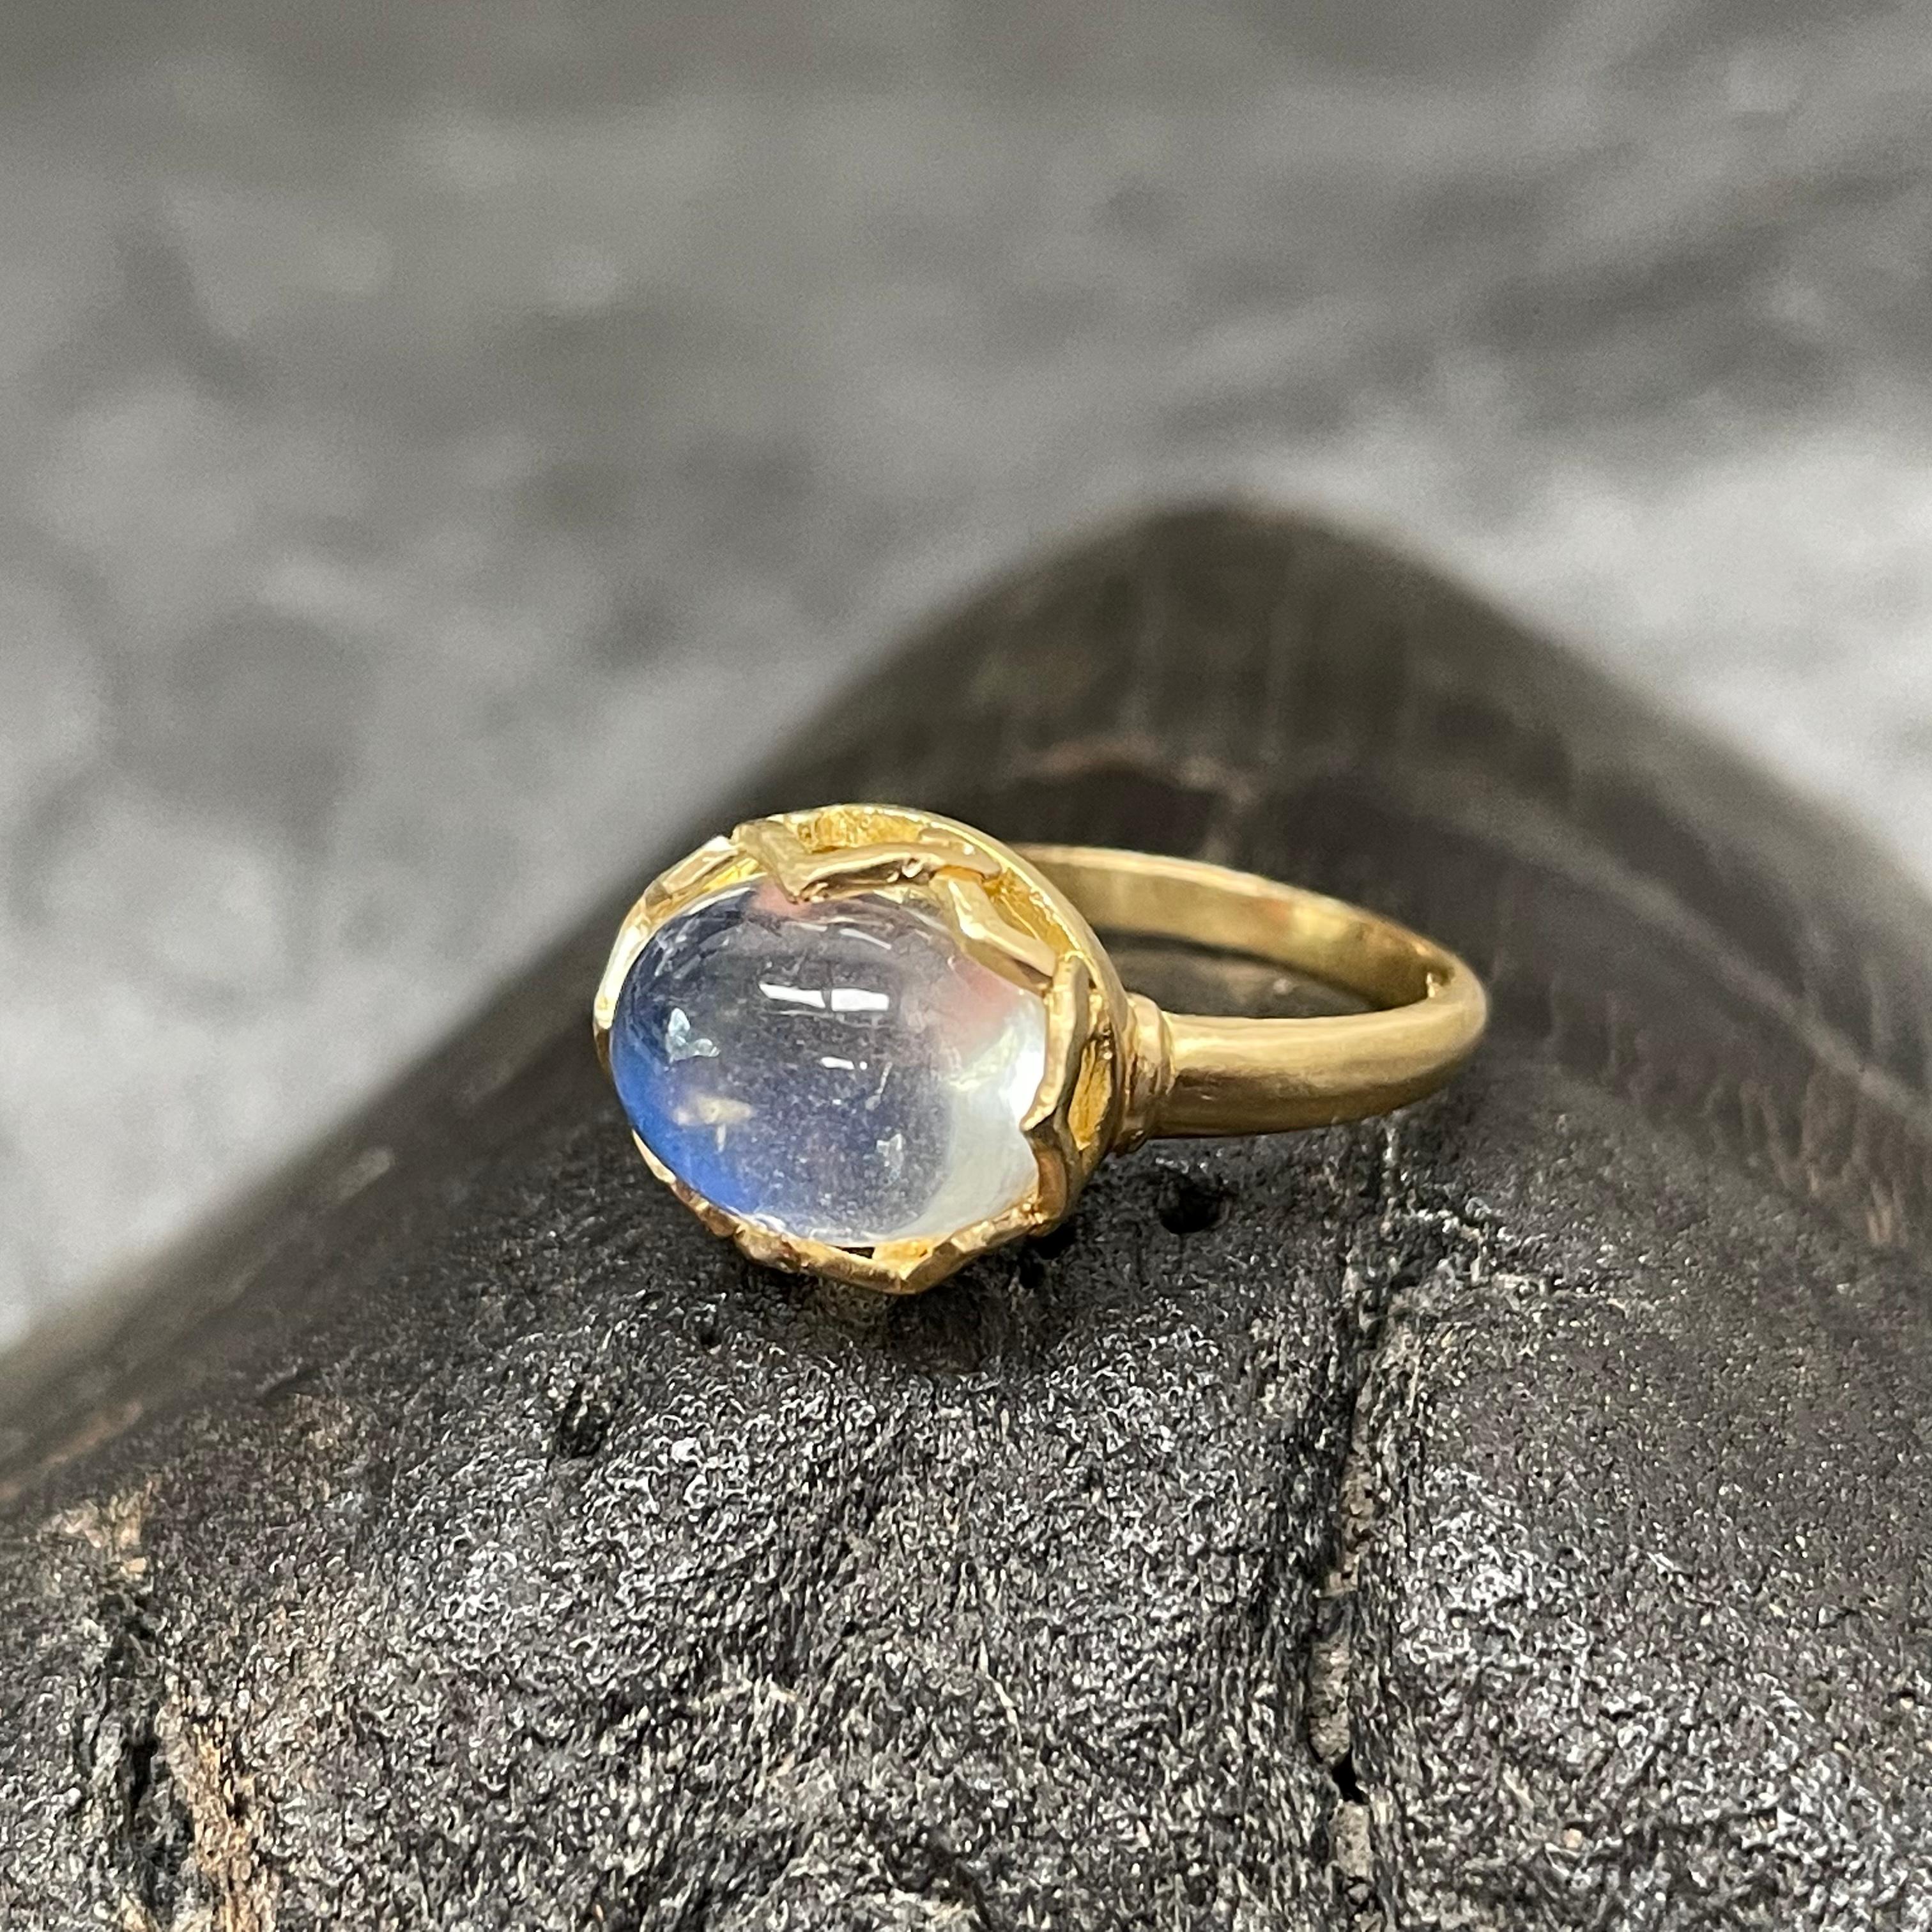 A shimmering 8 x10 mm rainbow moonstone is held in an airy embrace amid a carved lattice design bezel and plain matte-finish tapered shank.
You can't go wrong with this beautiful stone. A delicate and eye-catching design!  This ring is currently